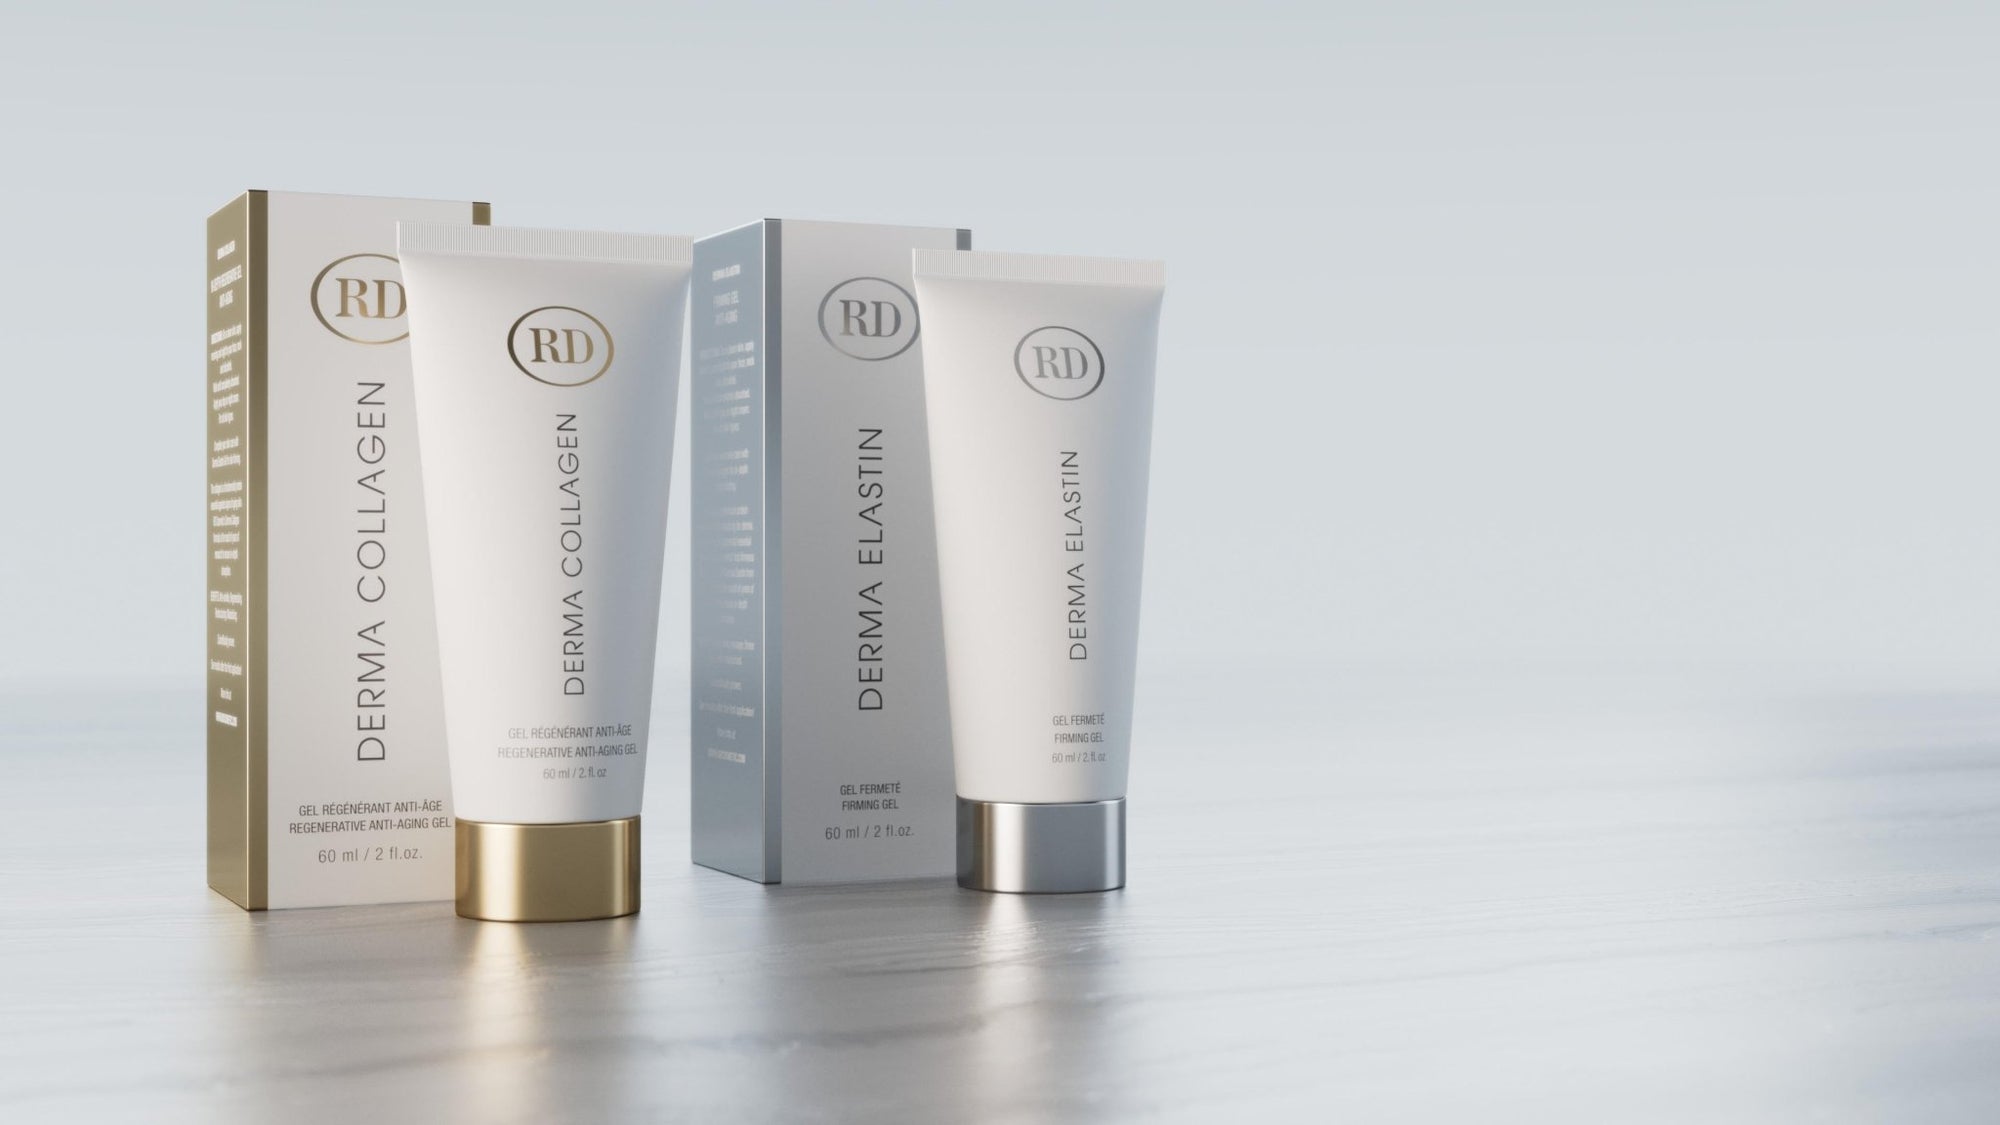 DUO RD COSMETIC - Espace Skins Montreal